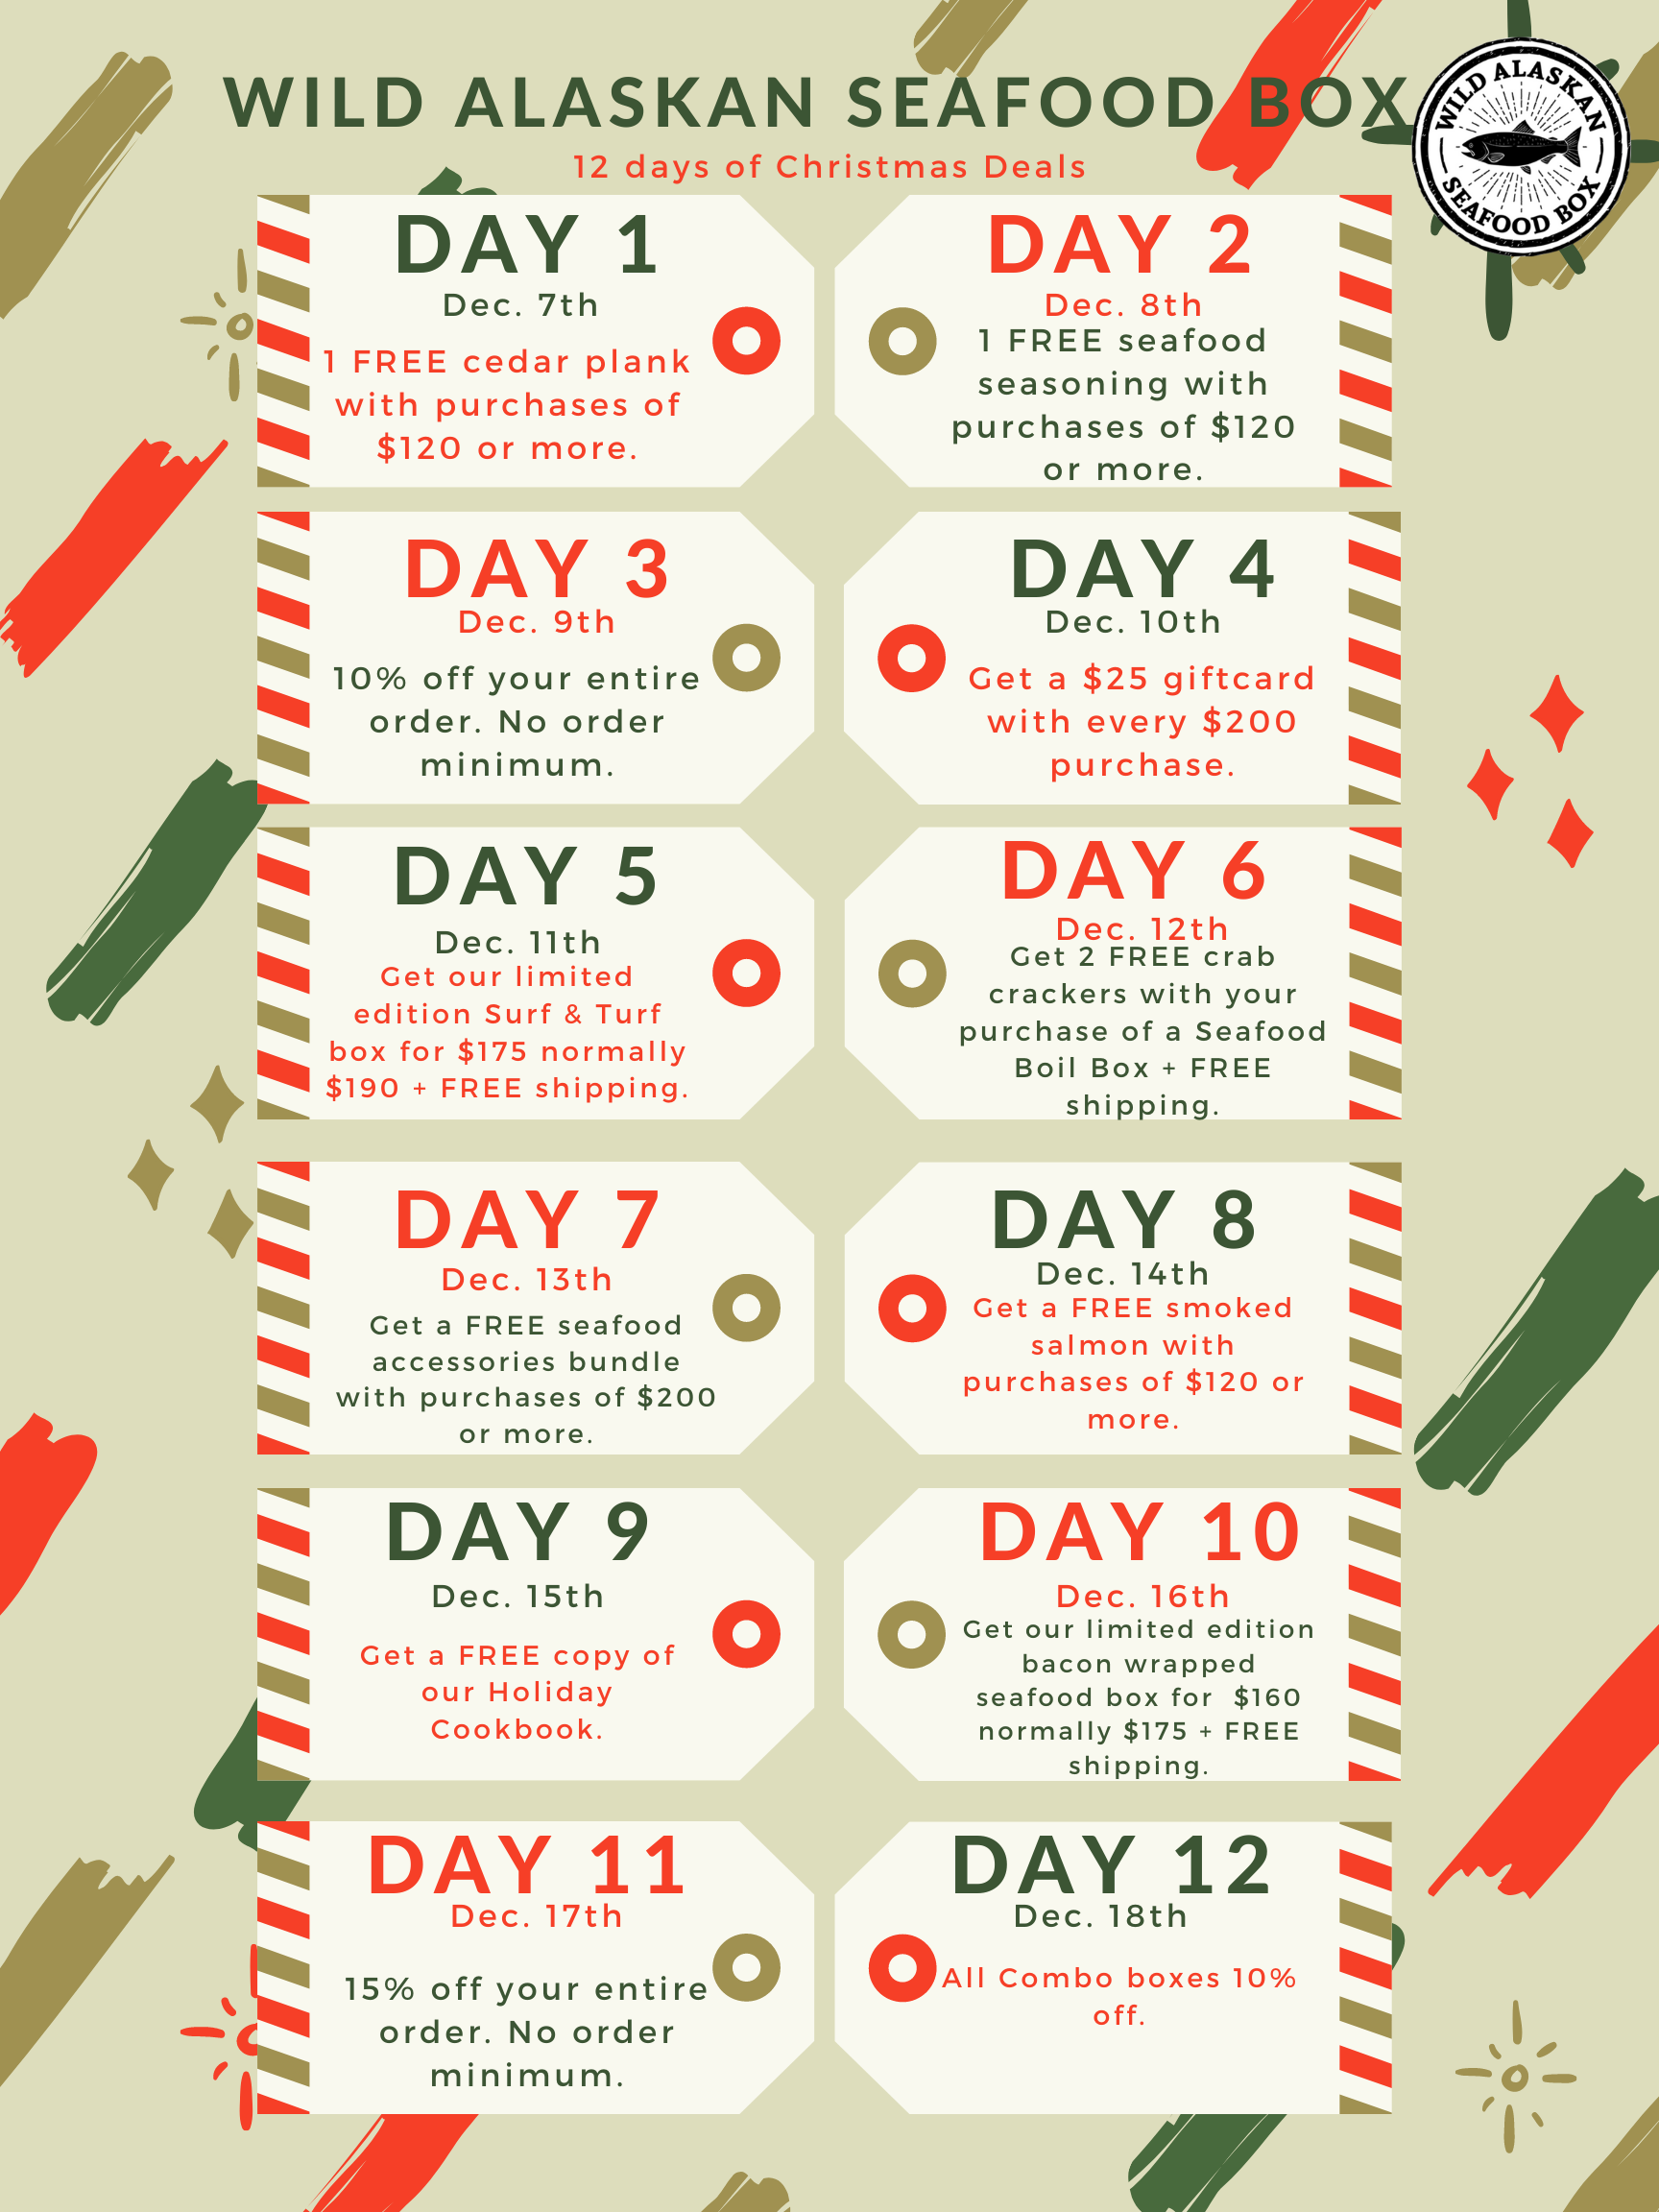 Get Ready For Our 12 Days Of Deals! – Wild Alaskan Seafood Box